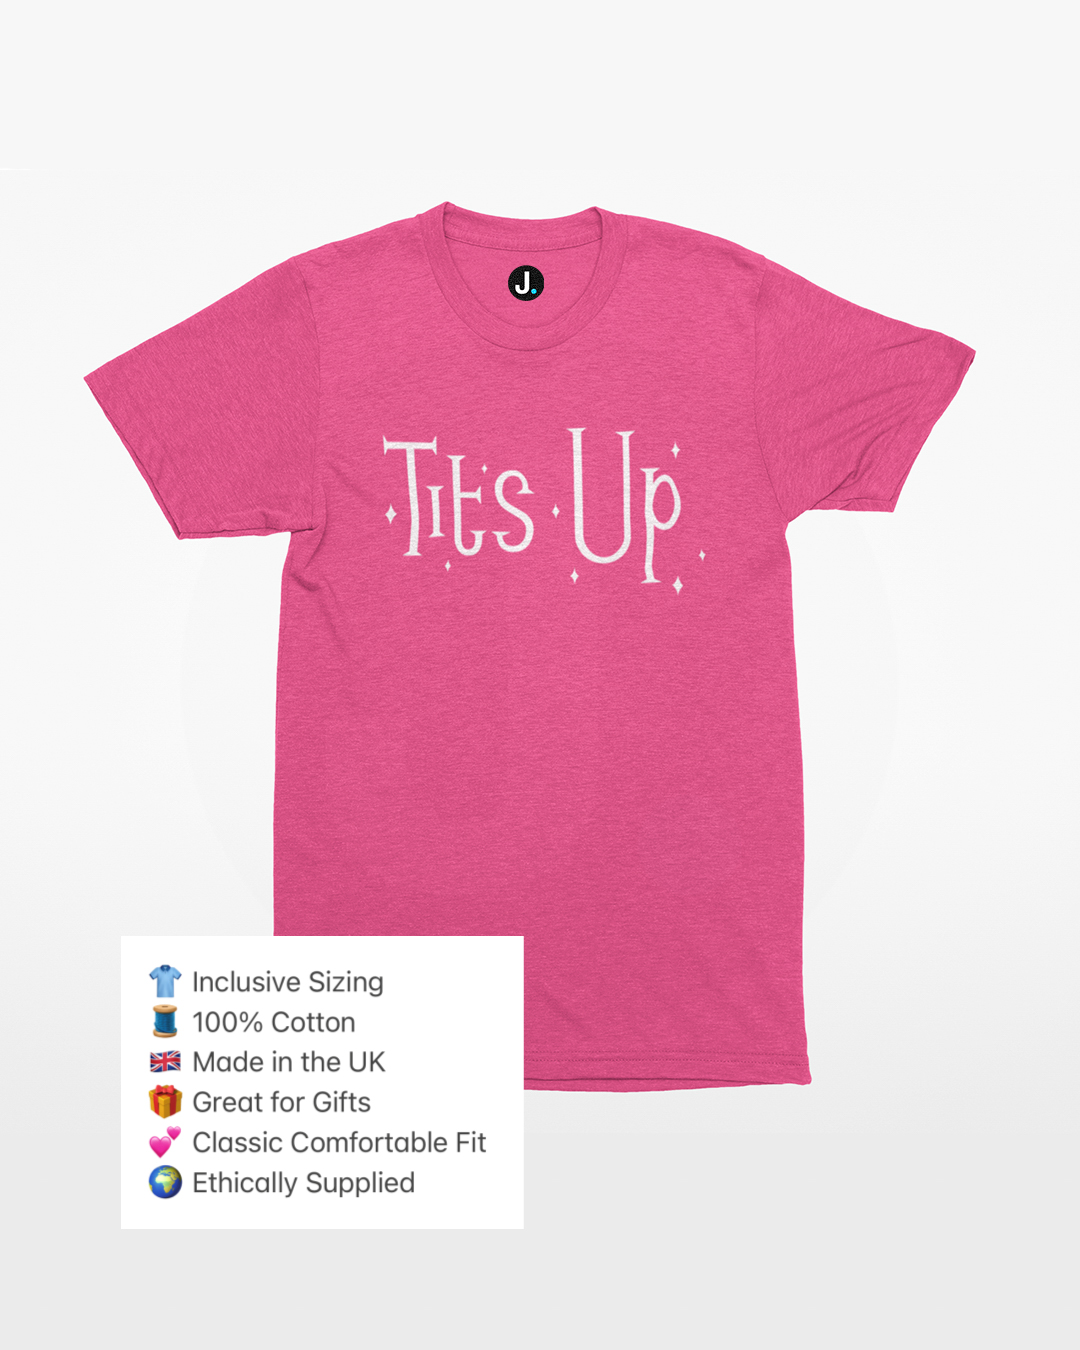 Tits Up T-Shirt - The Marvelous Mrs Maisel Inspired T-Shirt - Mrs Maisel Tits Up T-Shirt - Tits Up Mrs Maisel Inspired T-Shirt